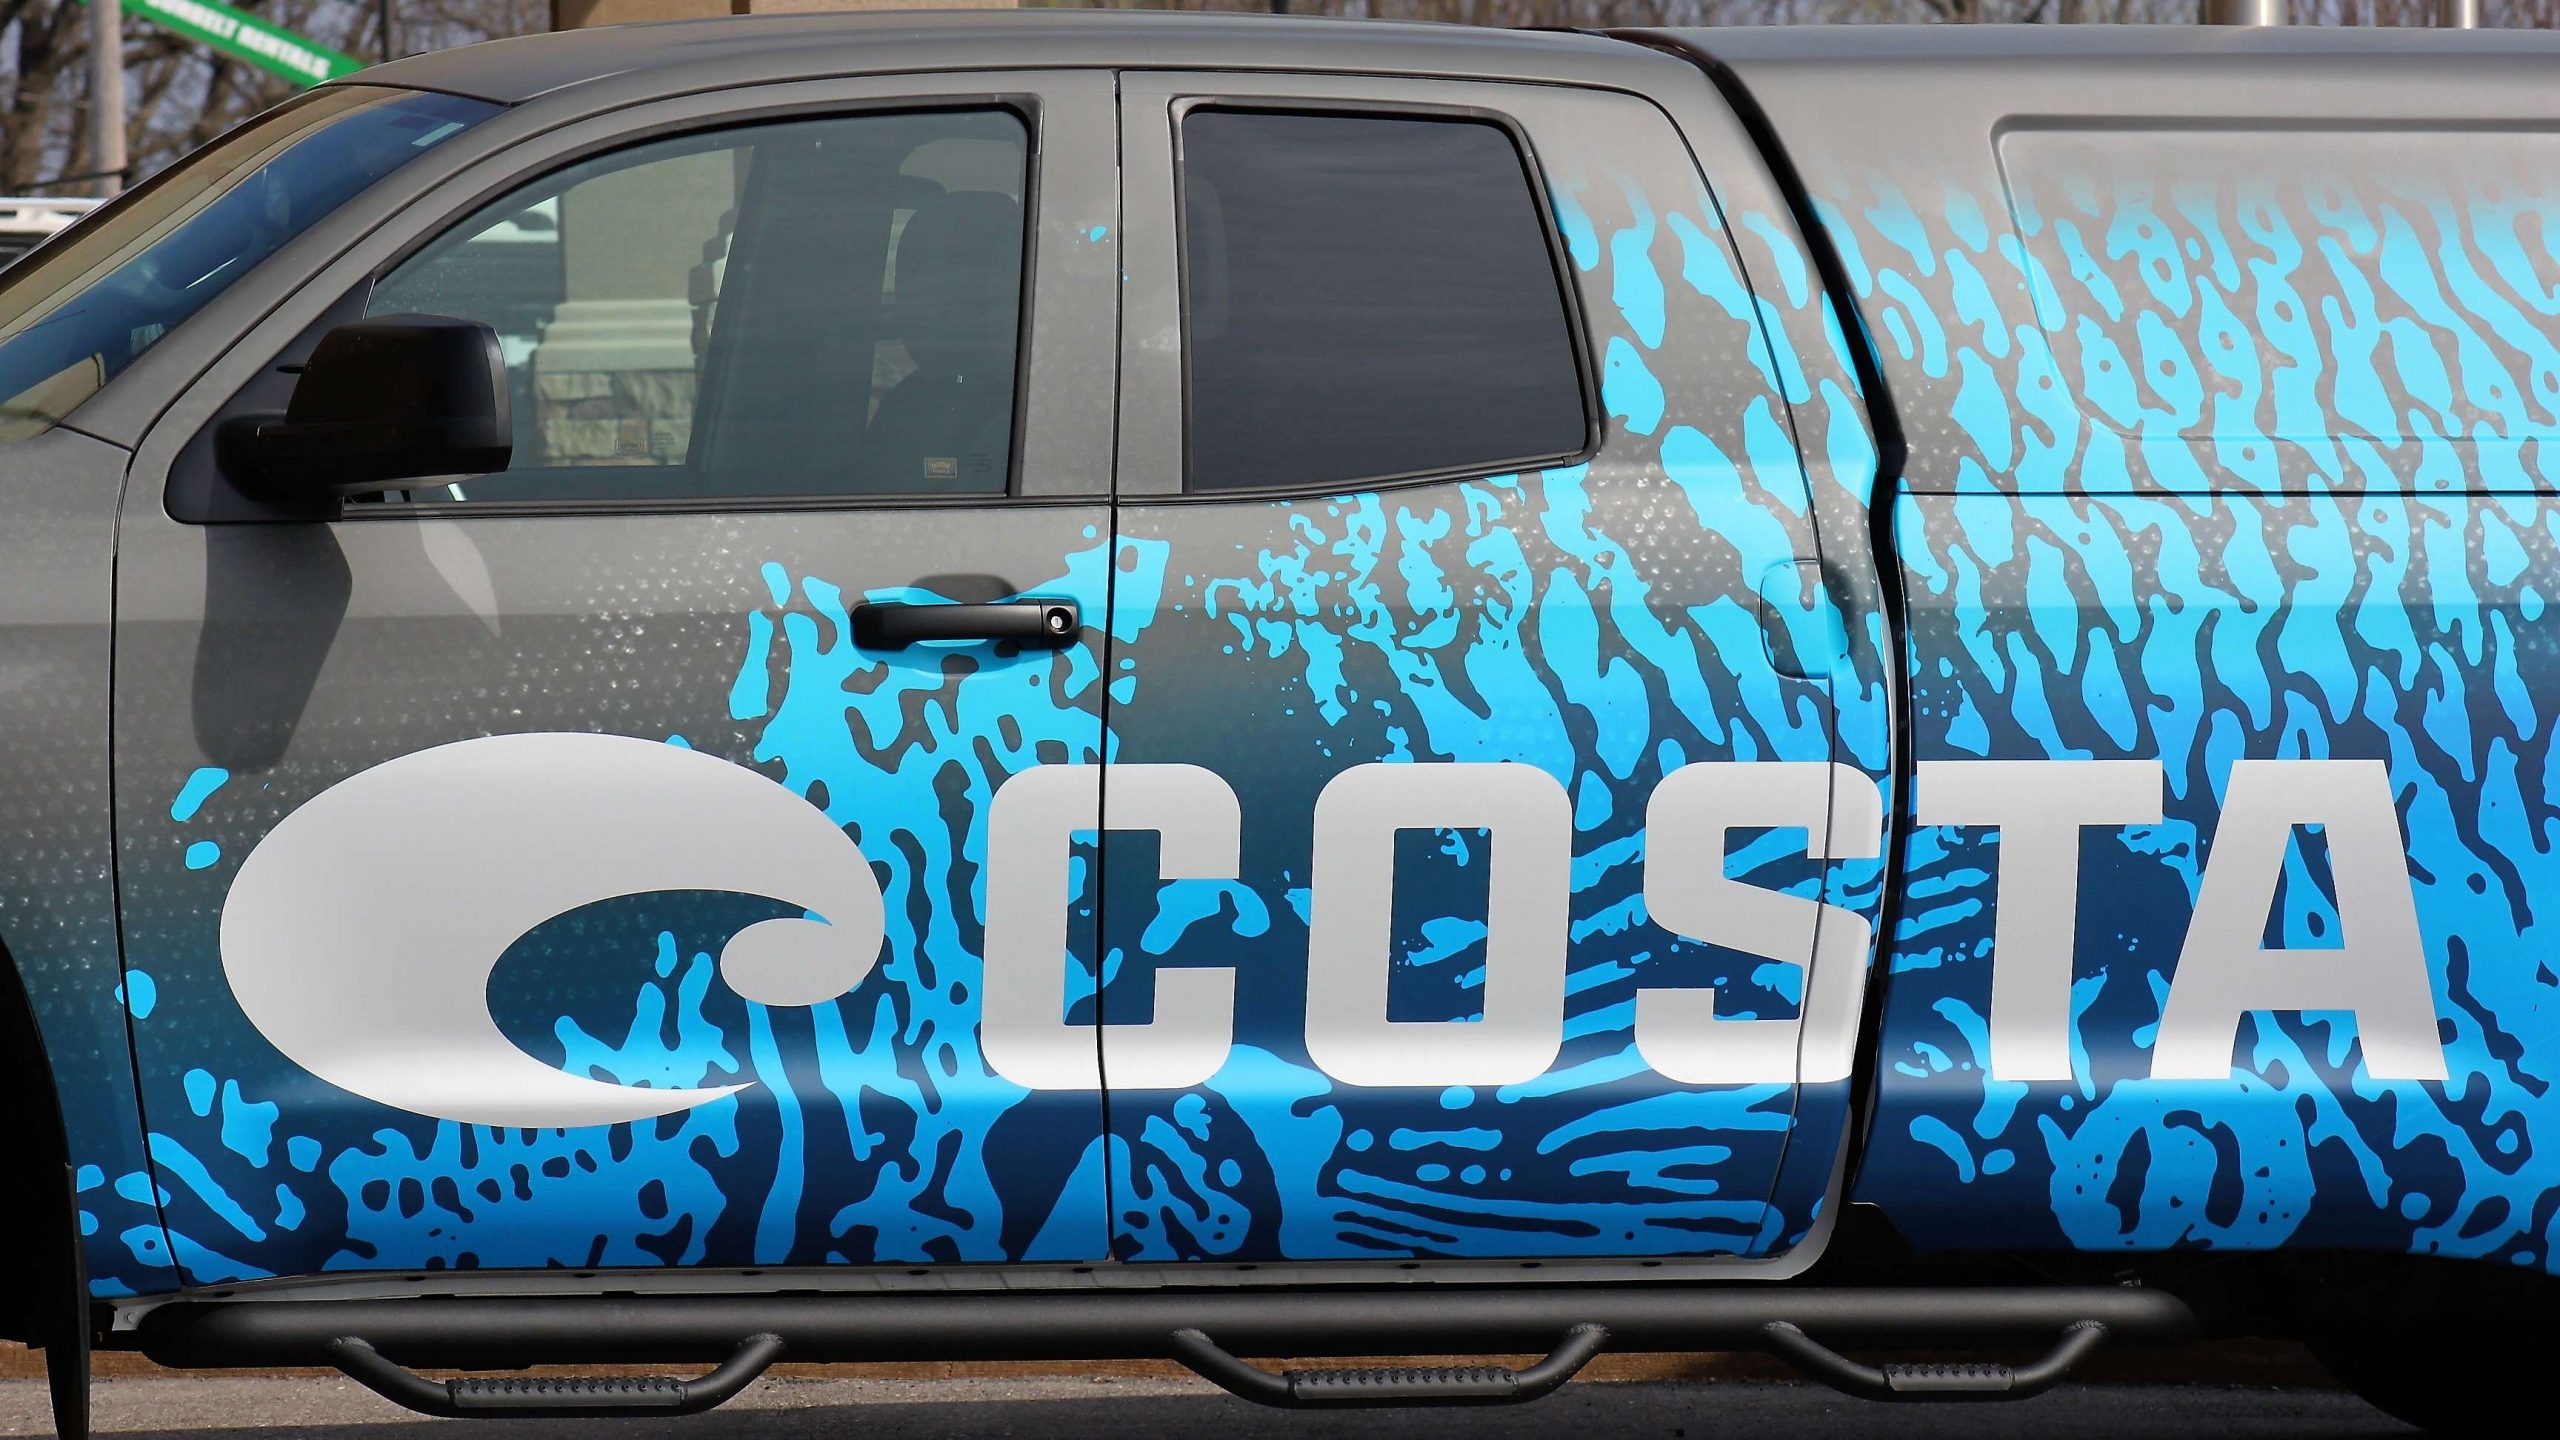 Costa sponsors the Bassmaster High School Series, and this Toyota truck lets us know that loudly and proudly.